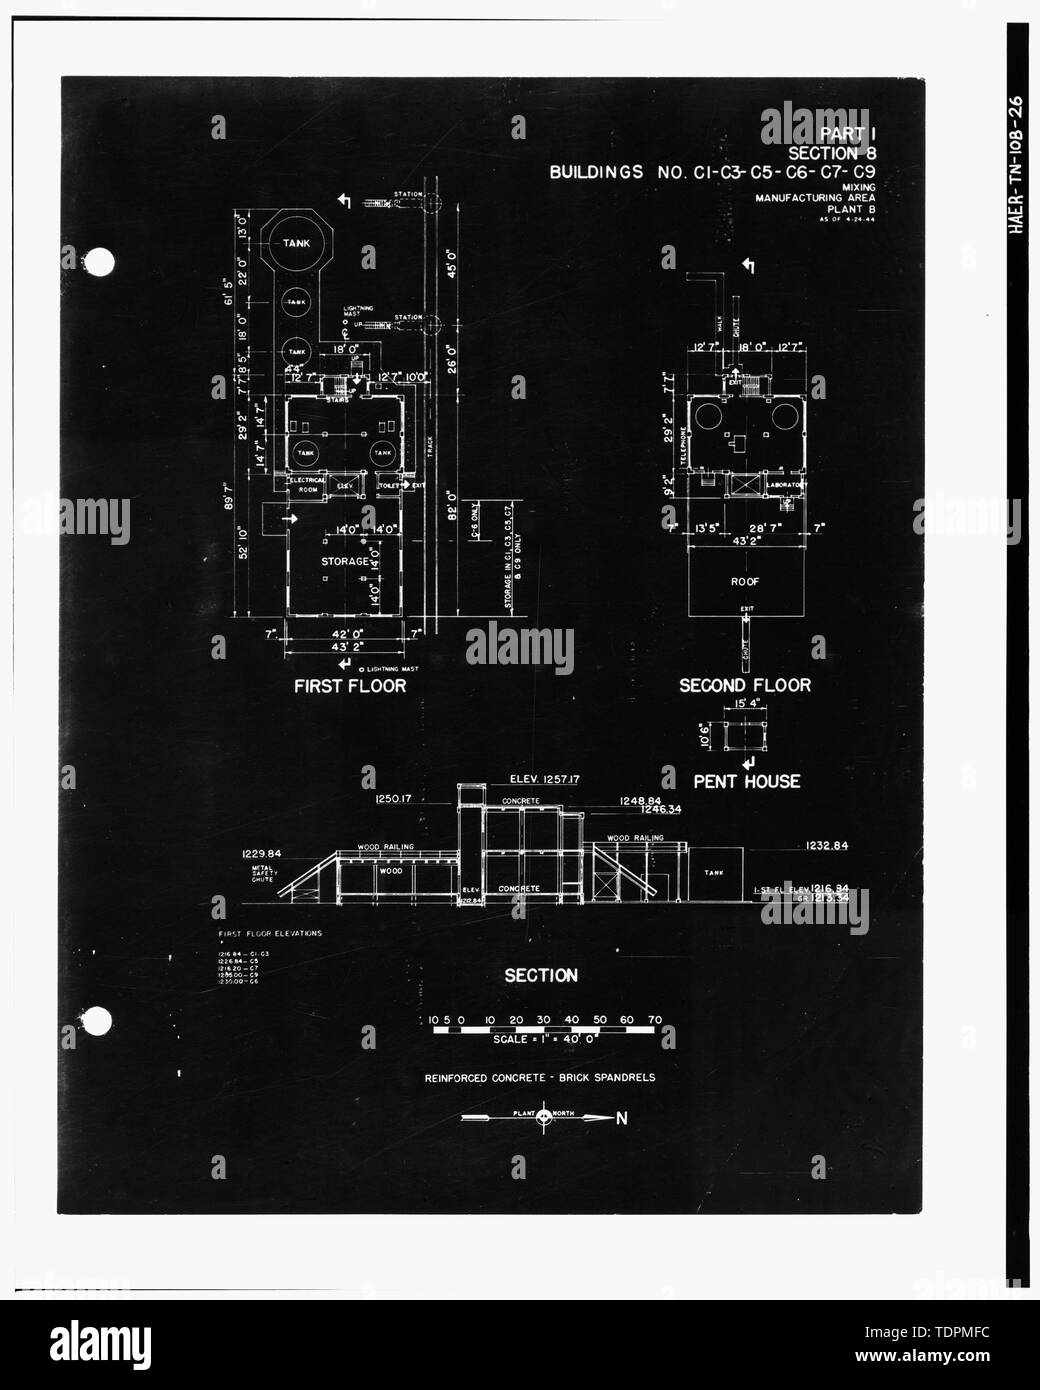 Photograph of a line drawing. '(PLAN LAYOUT AND CROSS SECTION OF) PART I, SECTION 8, BUILDINGS NO. C-1, C-3, C-5, C-6, C-7, C-9, MIXING, MANUFACTURING AREA, PLANT B AS OF 4-24-44.' From the U.S. Army Corps of Engineers. Industrial Facilities Inventory, Holston Ordnance Works, Kingsport, Tennessee. Plant B, Parts II, III. (Nashville, TN- Office of the District Engineer, 1944). - Holston Army Ammunition Plant, RDX-and-Composition-B Manufacturing Line 9, Kingsport, Sullivan County, TN; Bachmann                              , Werner E; Tennessee Eastman Corporation; U.S. Department of the Army; Na Stock Photo